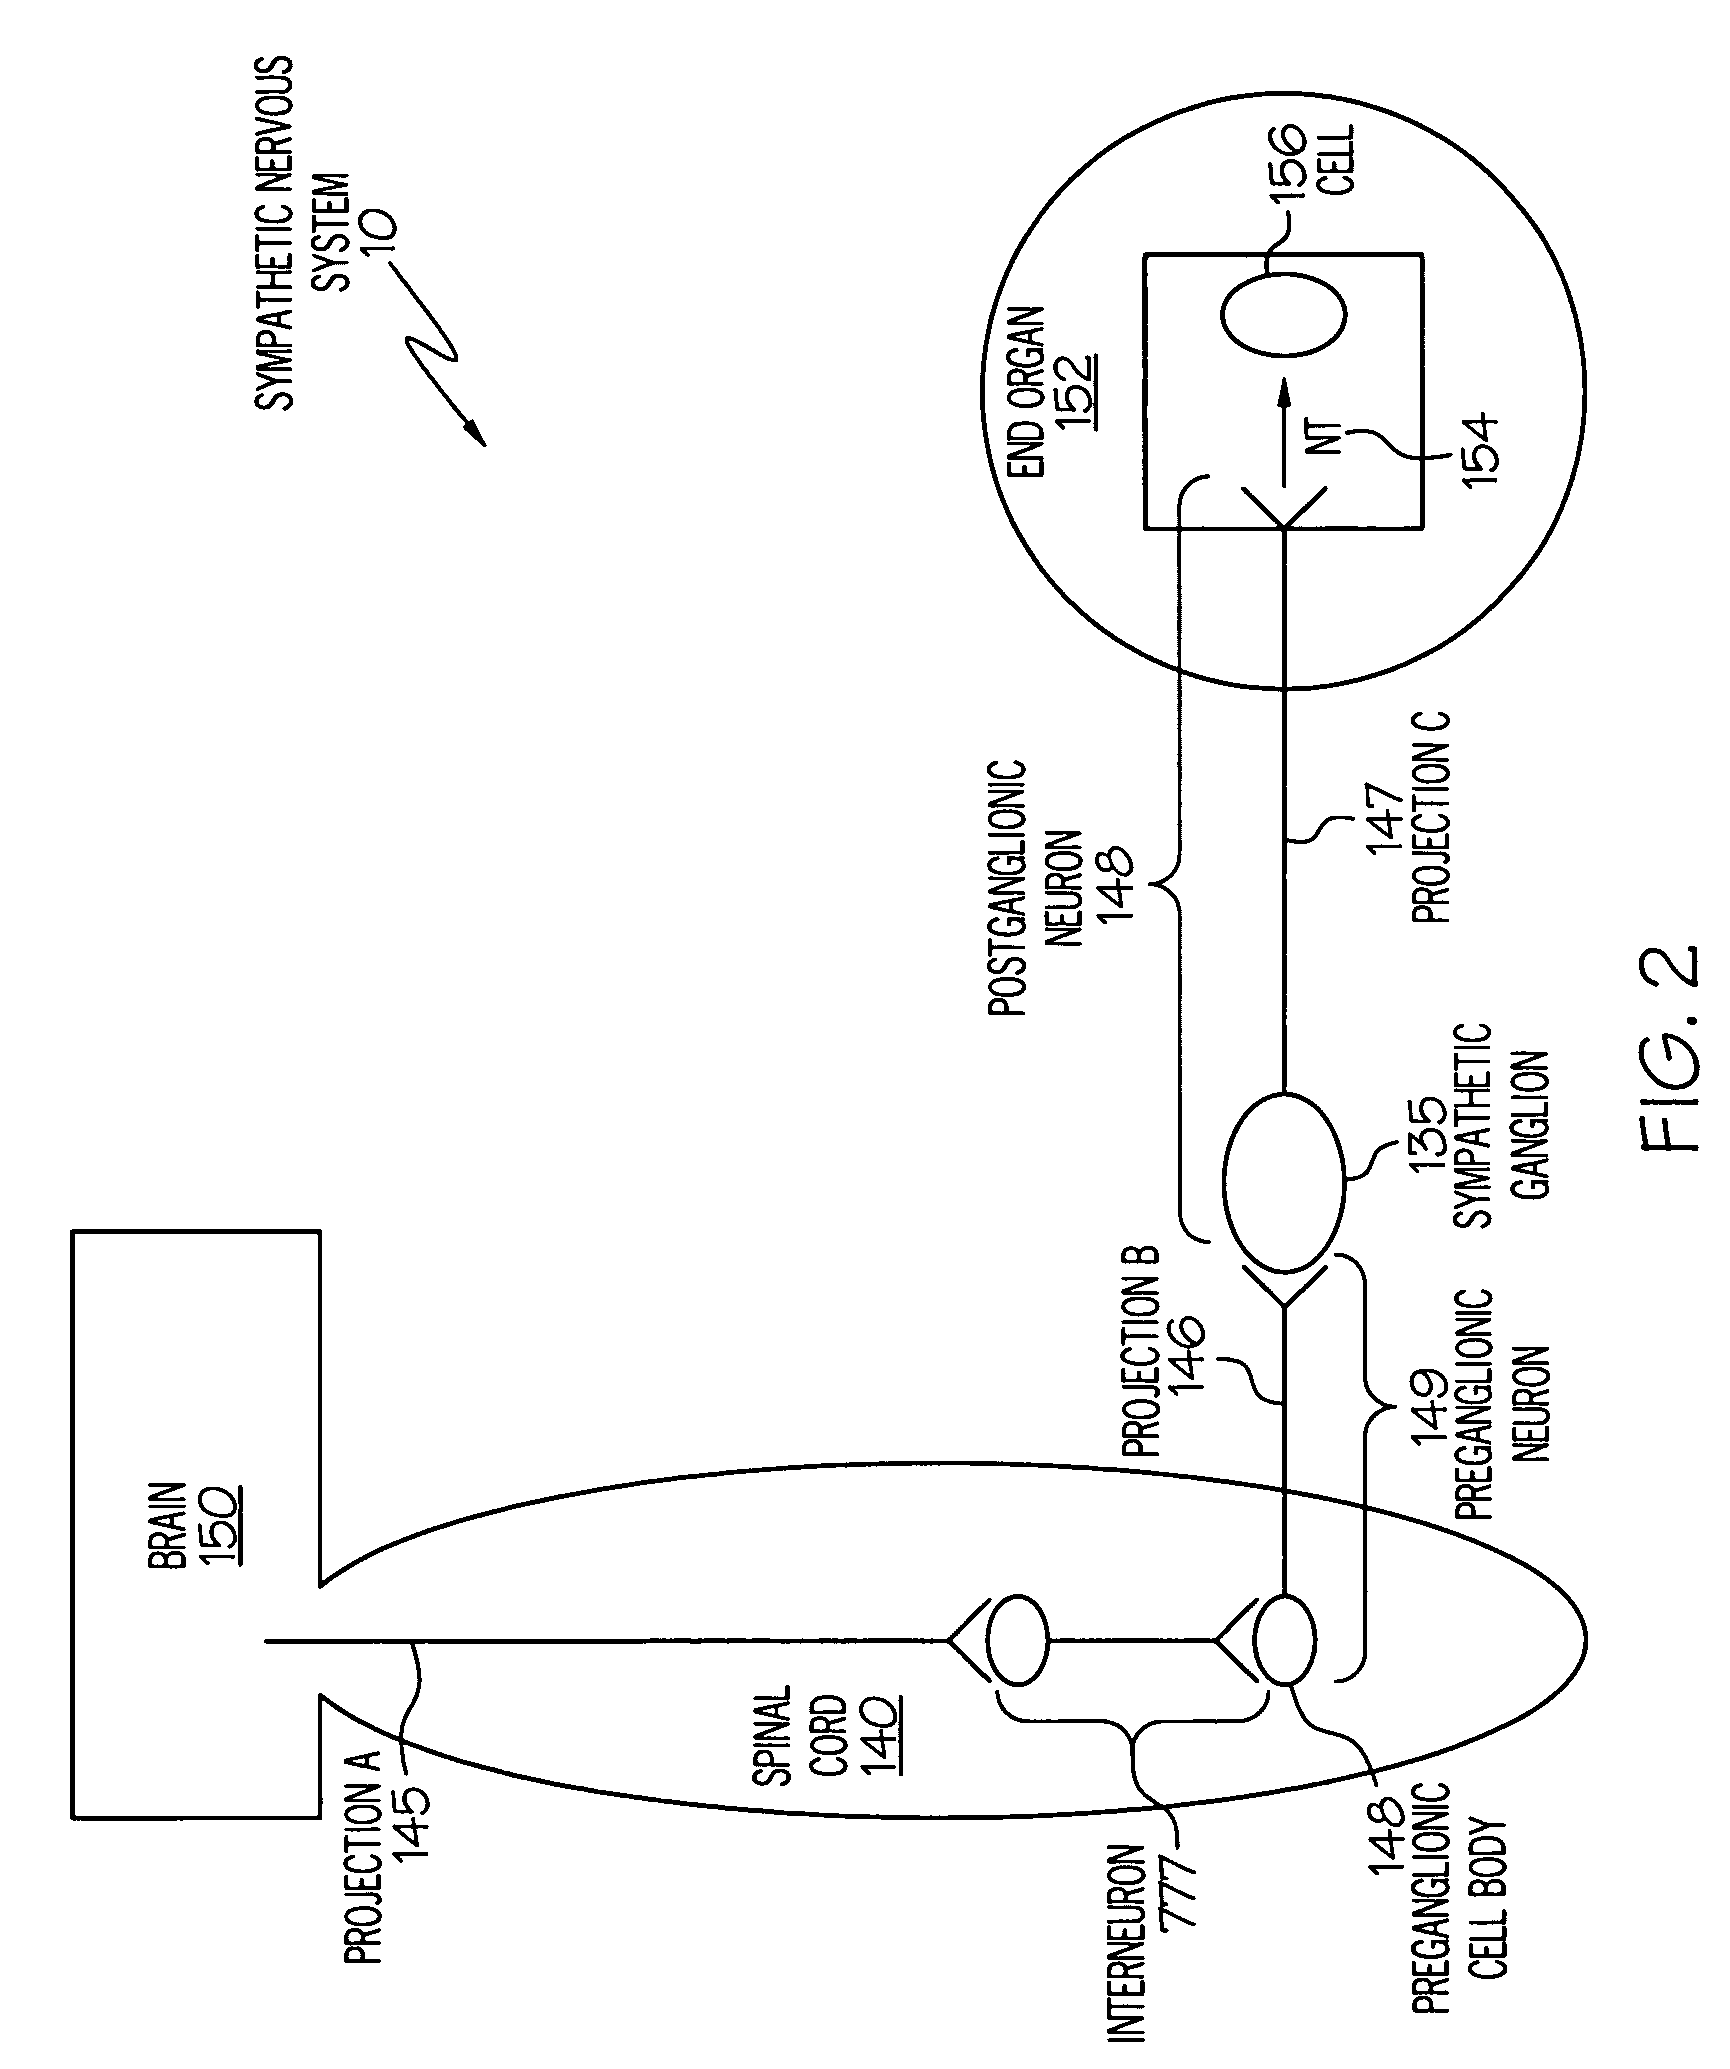 Device and method for attenuating an immune response